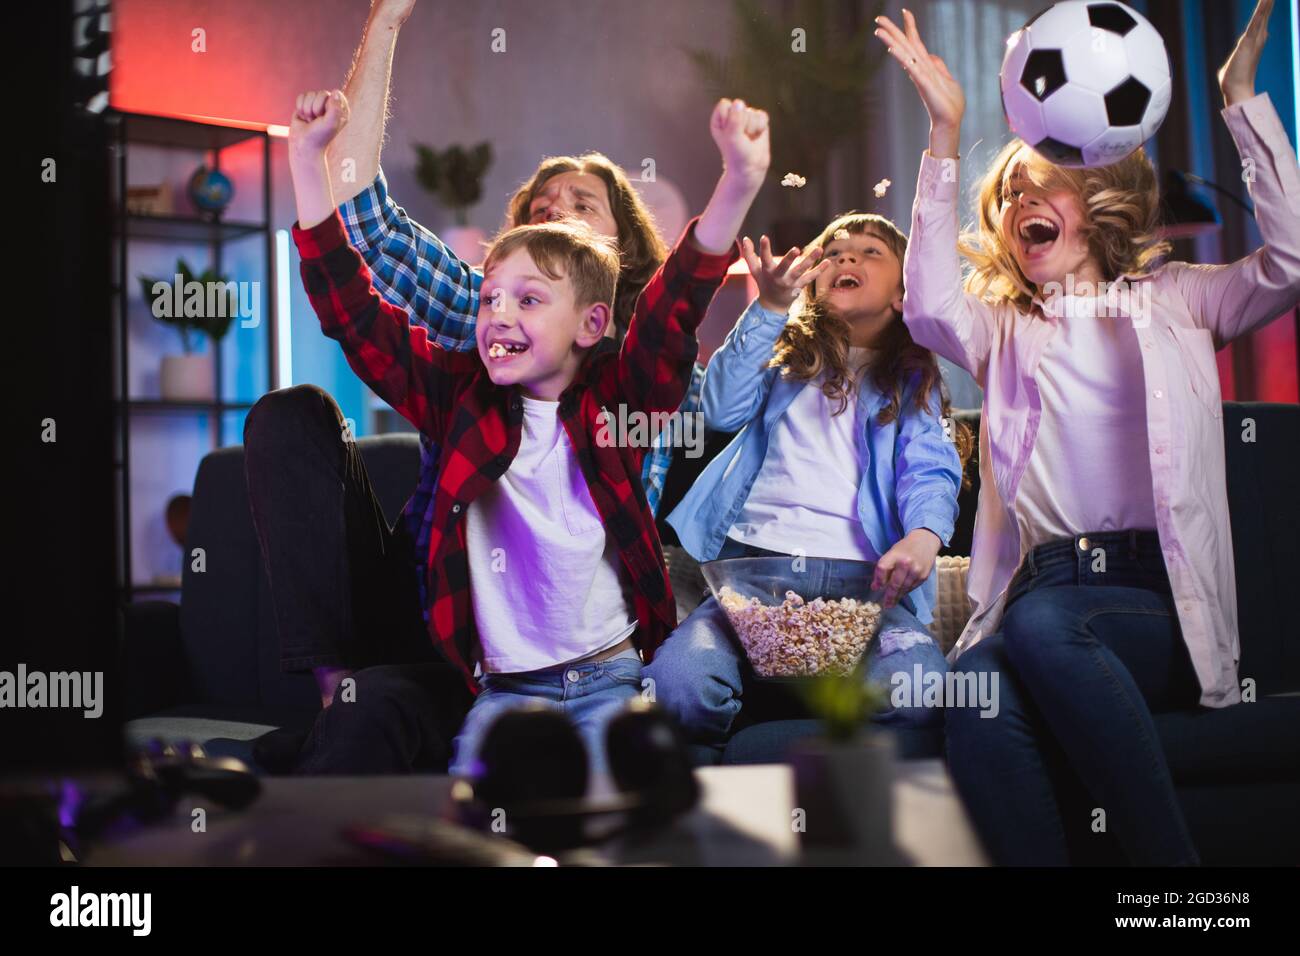 Caucasian family of four emotionally celebrating goal while watching soccer on TV. Parents with two kids sitting on couch, eating popcorn and enjoying time together. Stock Photo